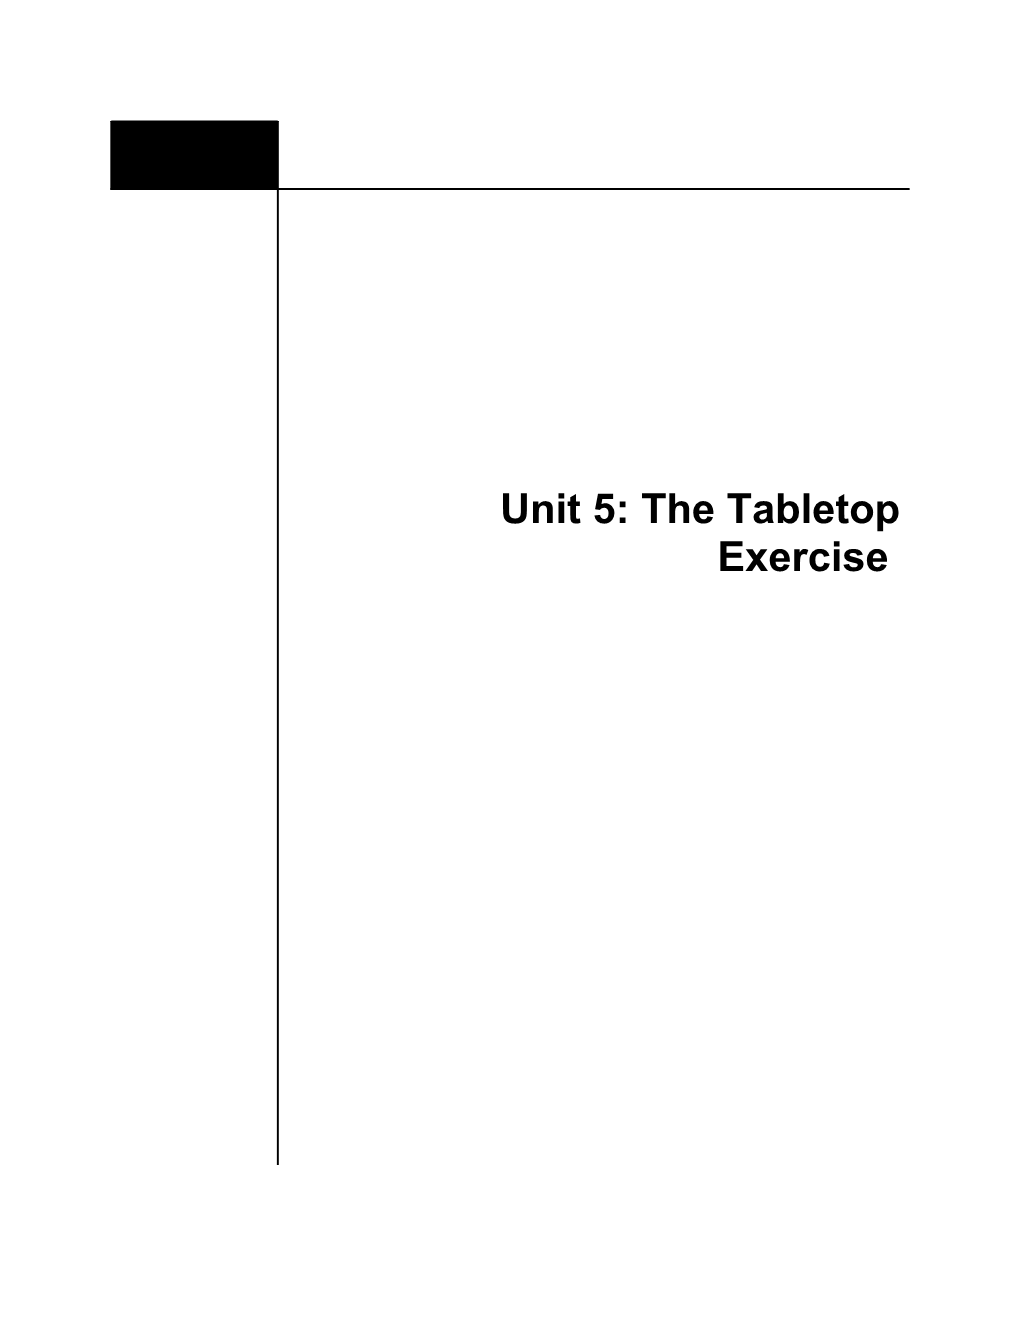 Unit 5: the Tabletop Exercise